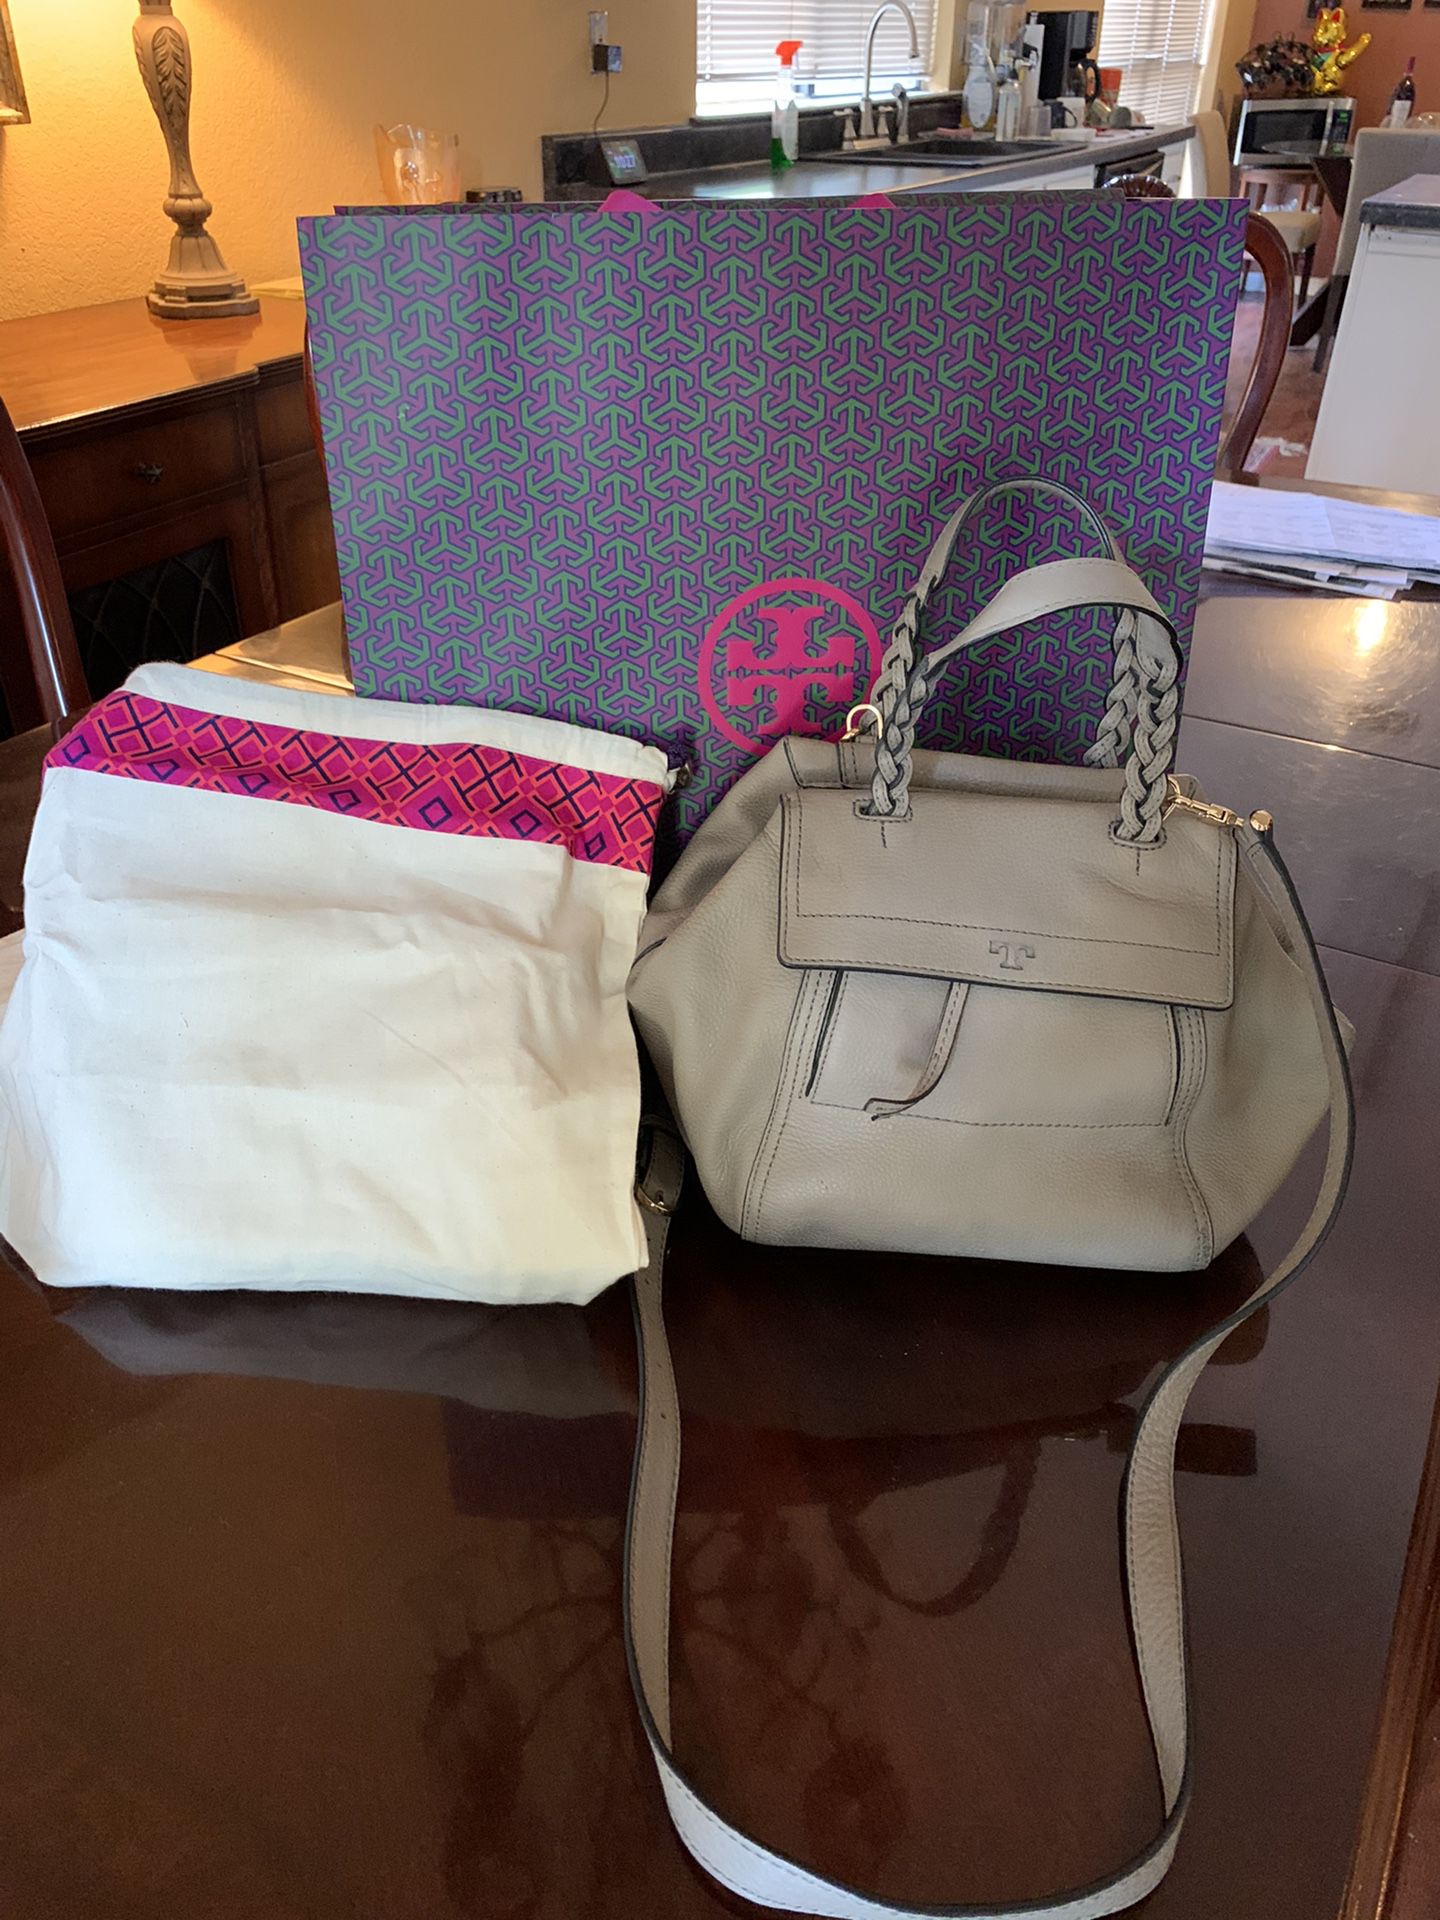 14x7x8. With straps up 12 inches high. AUTHENTIC TORY BURCH handbag purse  satchel style. Paid . Includes original dust bag and purchased bag. R  for Sale in Buda, TX - OfferUp